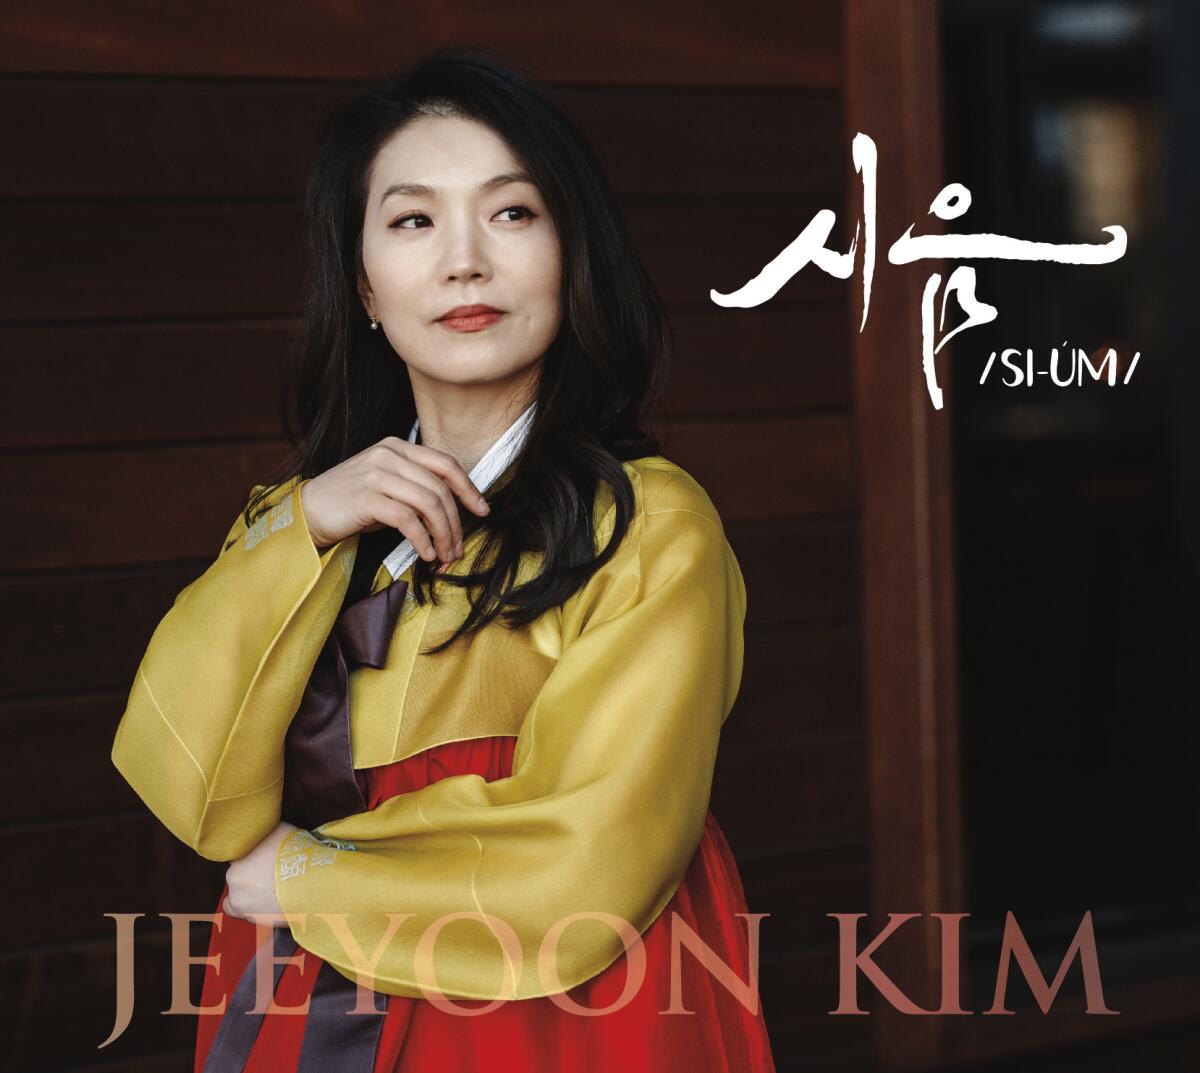 Jeeyoon Kim's concert in La Jolla on Sunday, April 24, will be a blend of piano, poetry and photography.